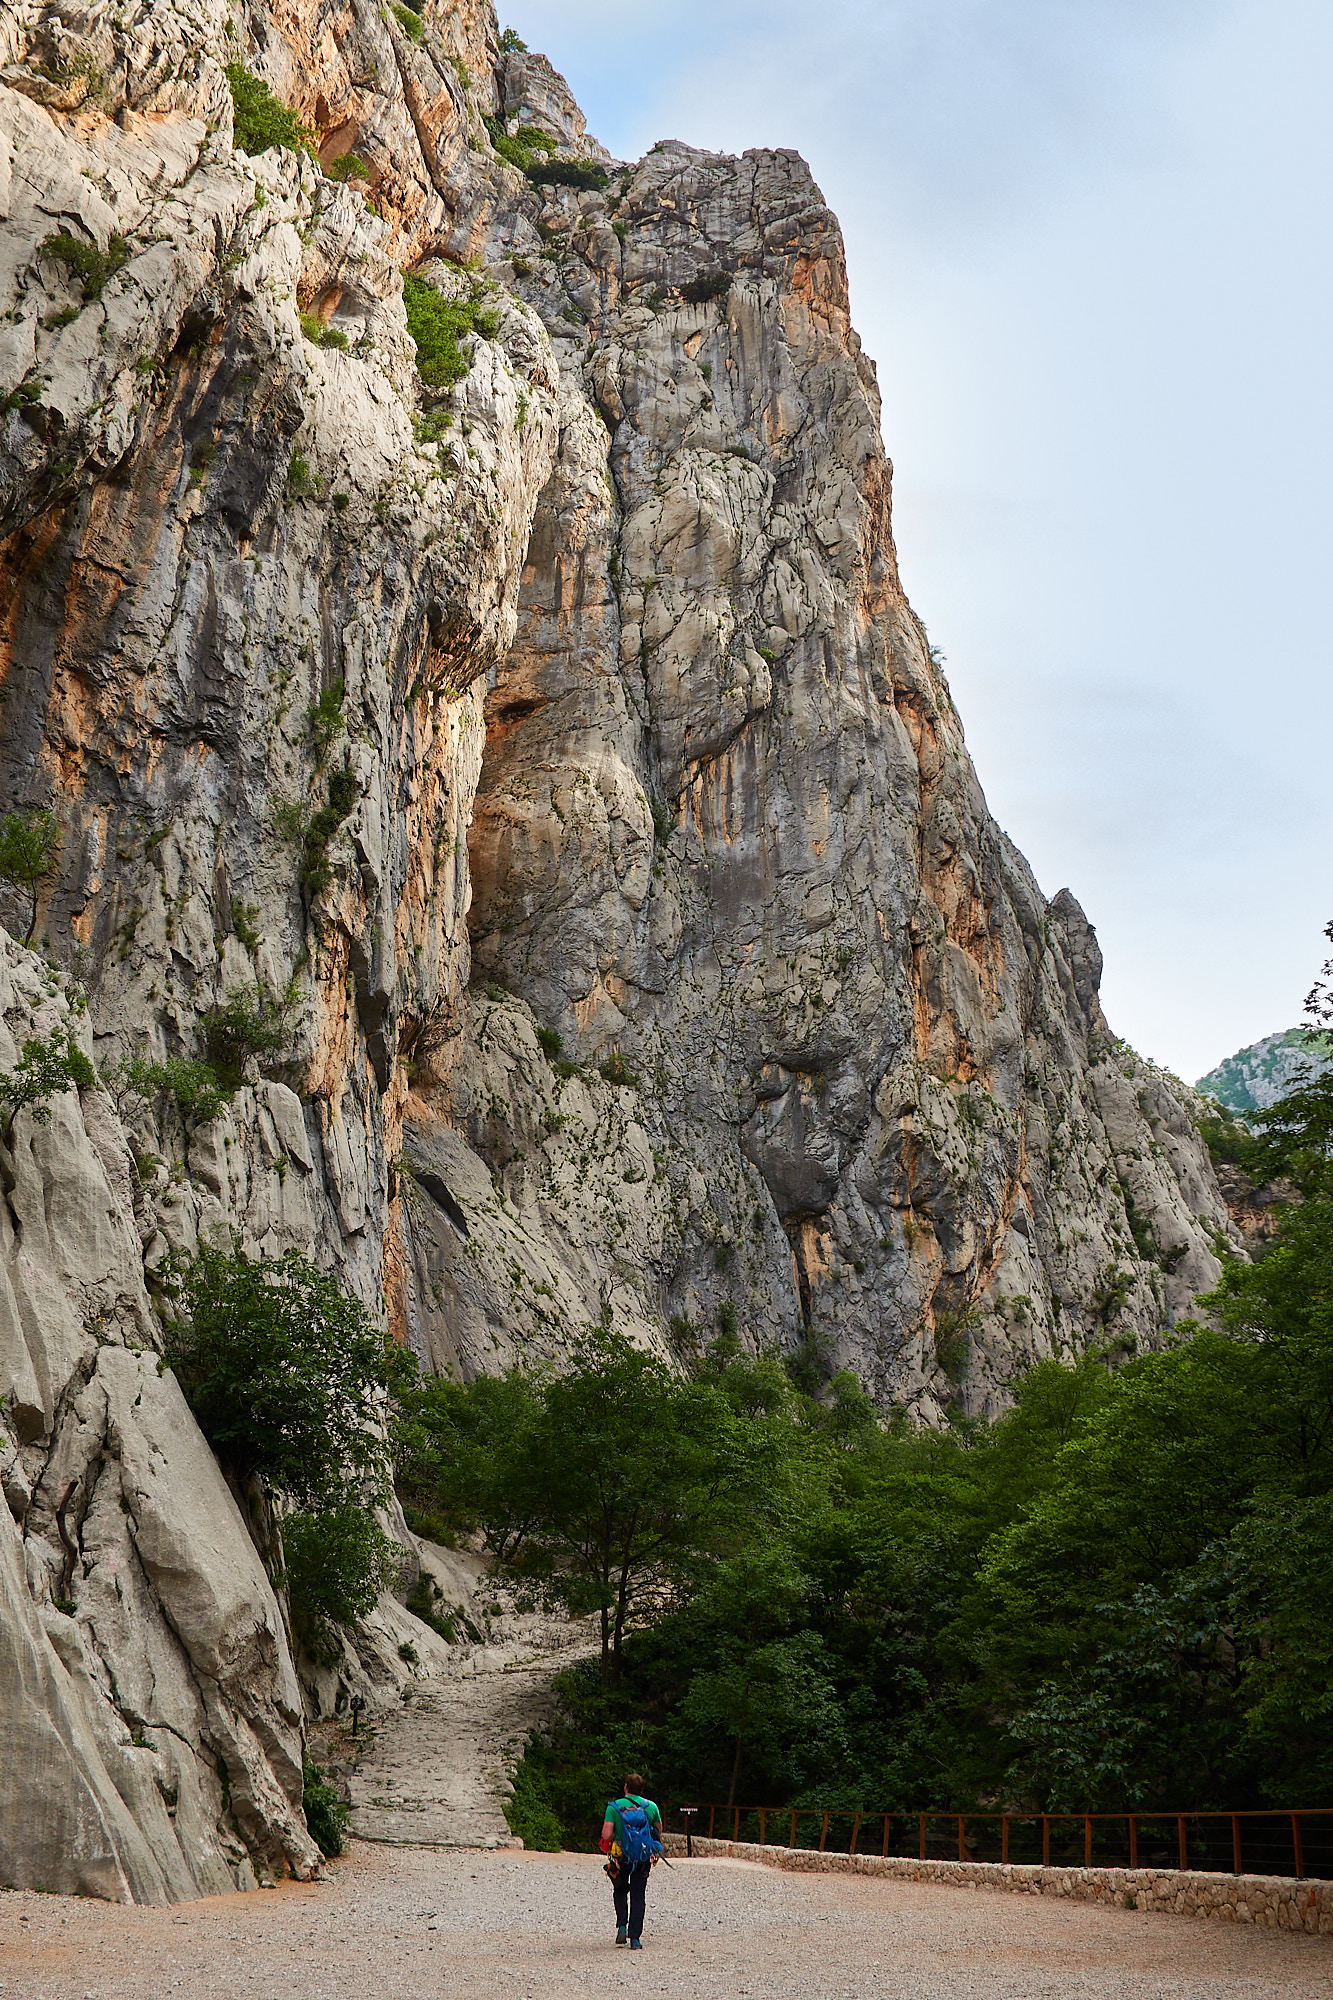 A climber walking towards a large limestone cliff called Debeli Kuk in the Paklenica gorge in Croatia